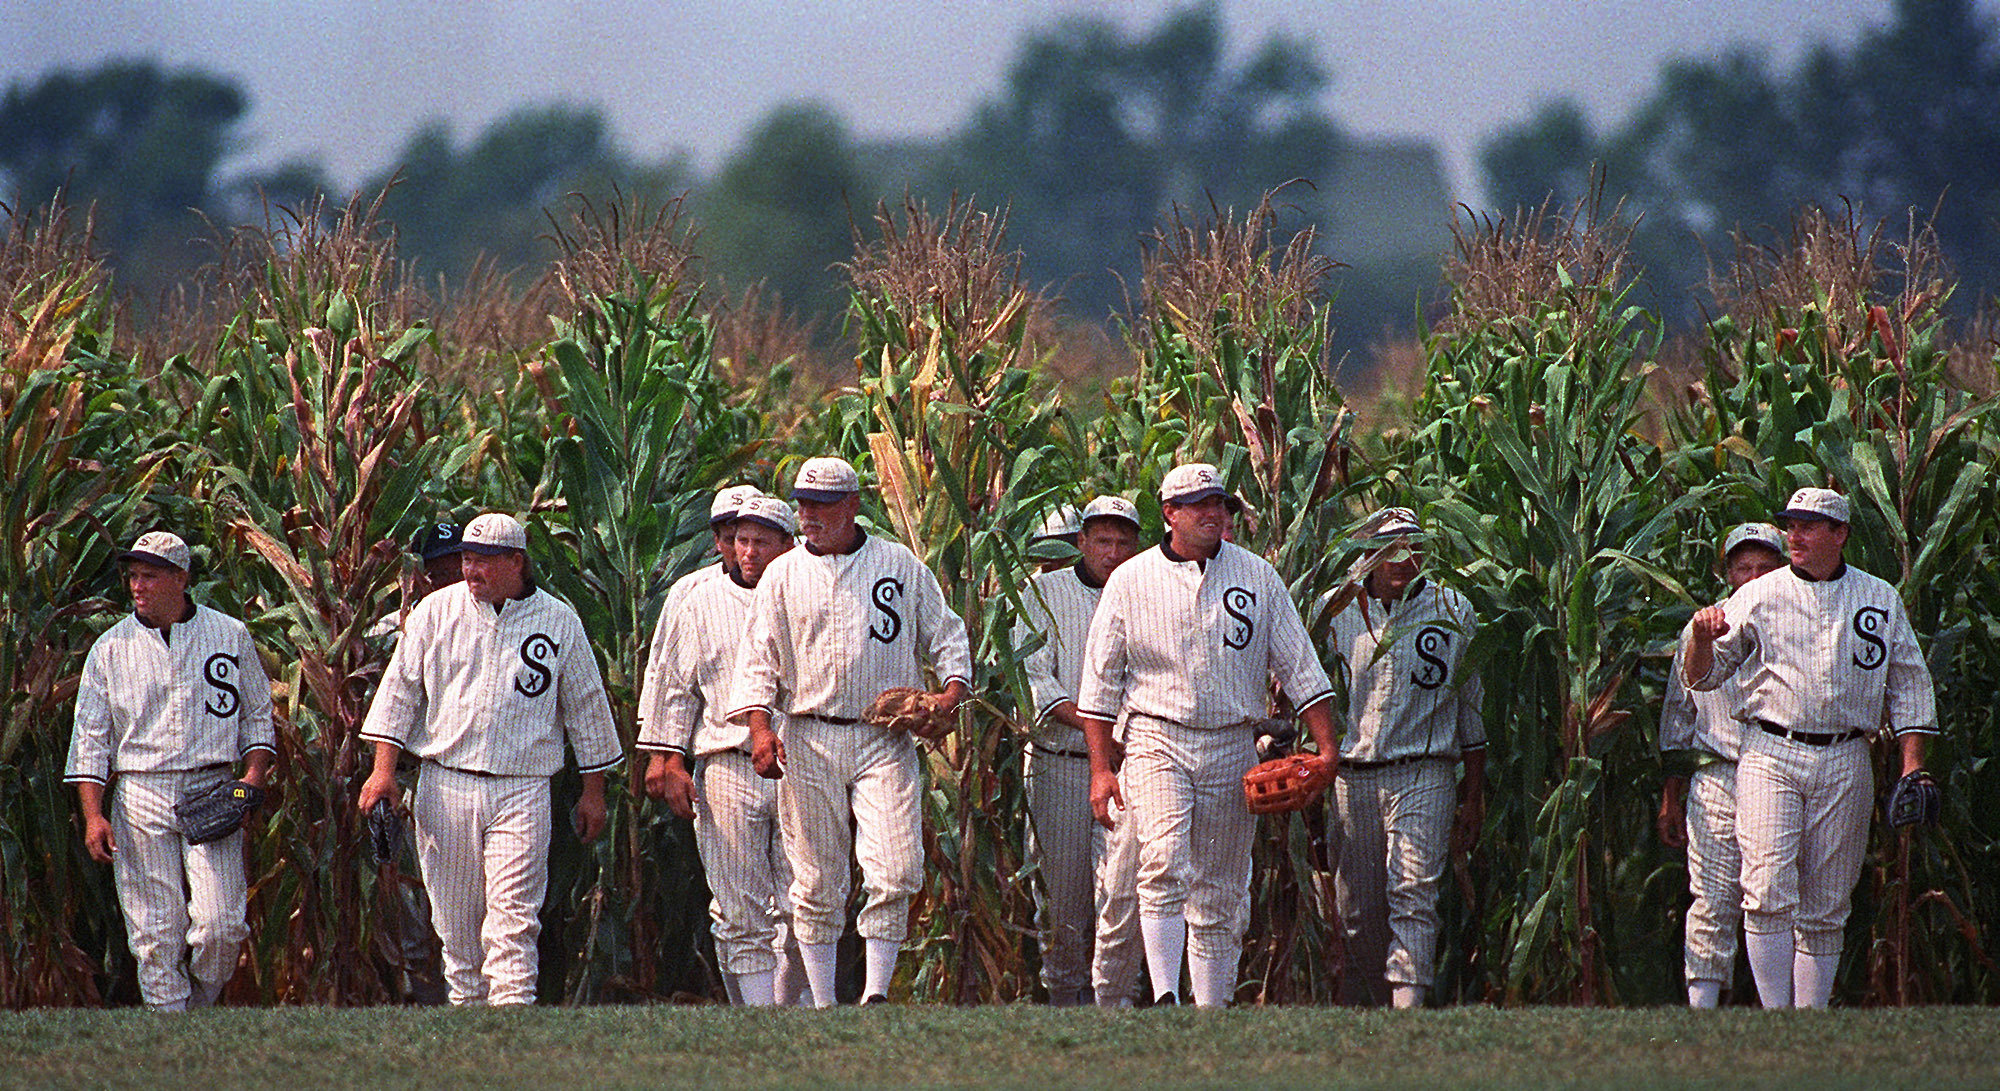 Chicago White Sox should have kept the Field of Dreams game